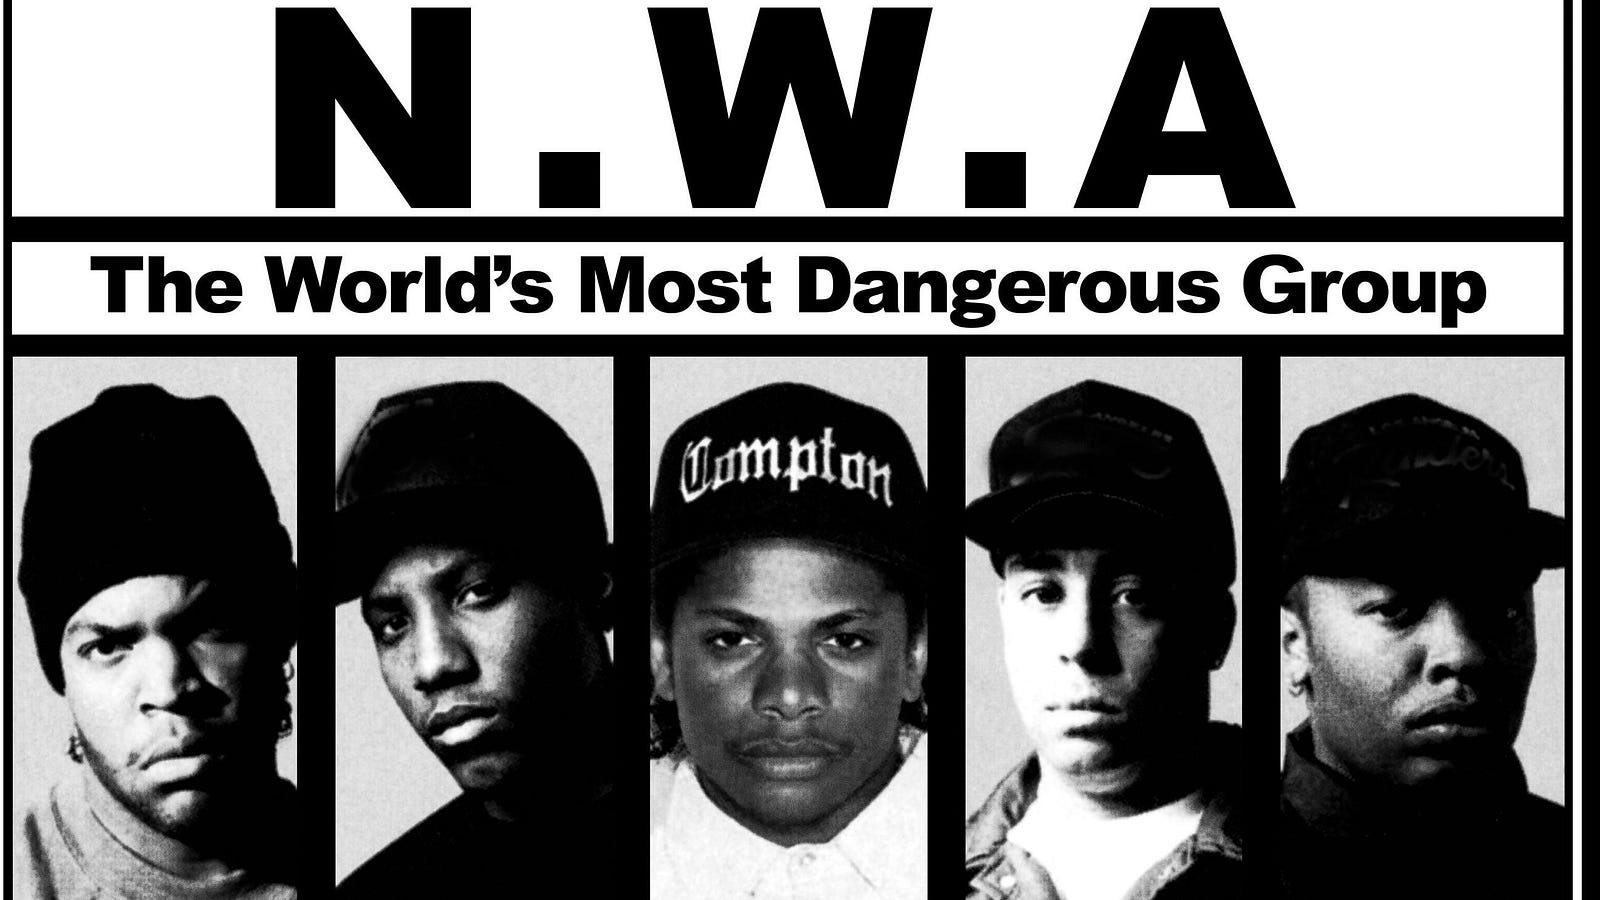 “I Got Something To Say:” N.W.A, Street Journalism and the Media